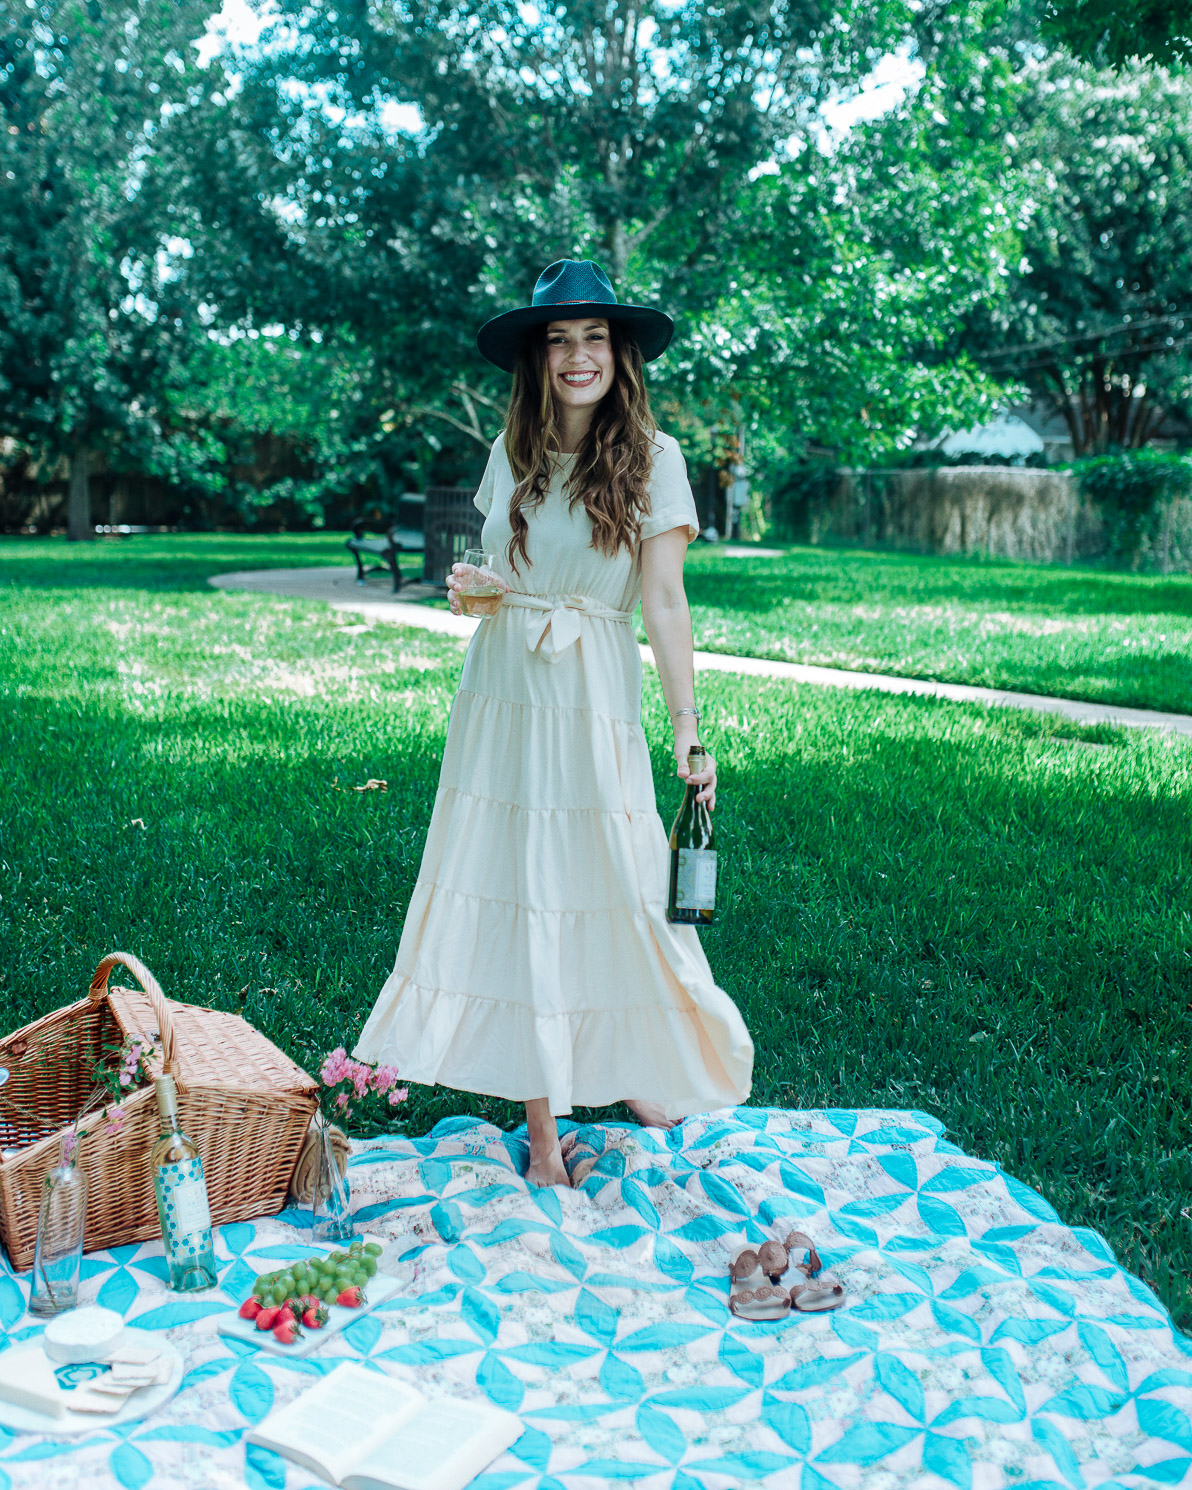 What to bring on a picnic: Tips on Throwing A Southern Style Picnic